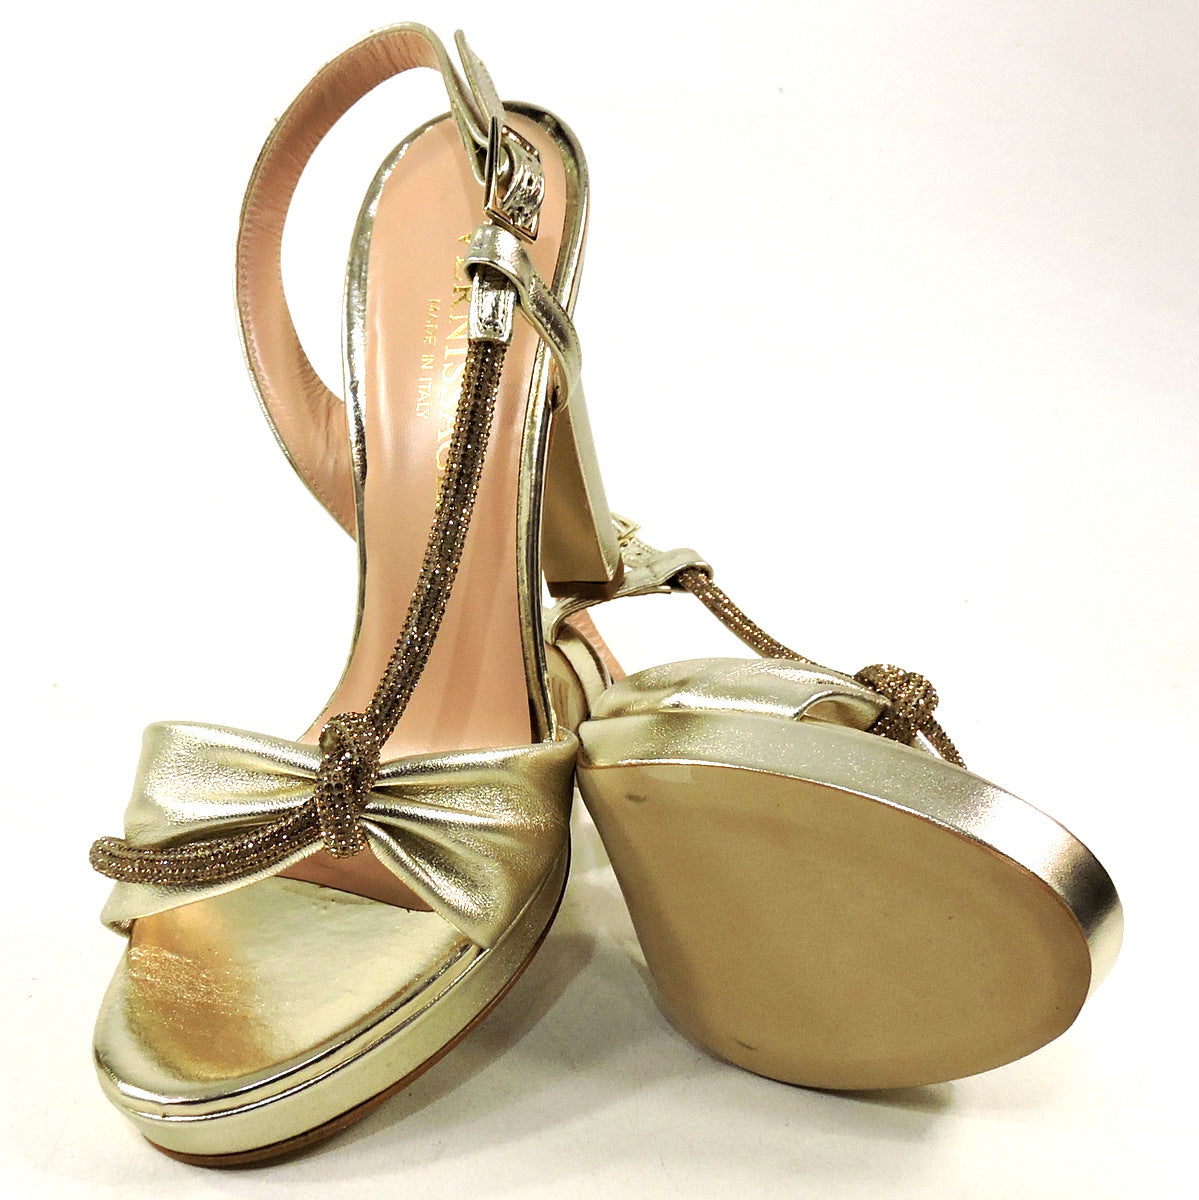 VERNISSAGE 🇮🇹 WOMEN'S GOLD LEATHER FASHION HEELED SANDALS